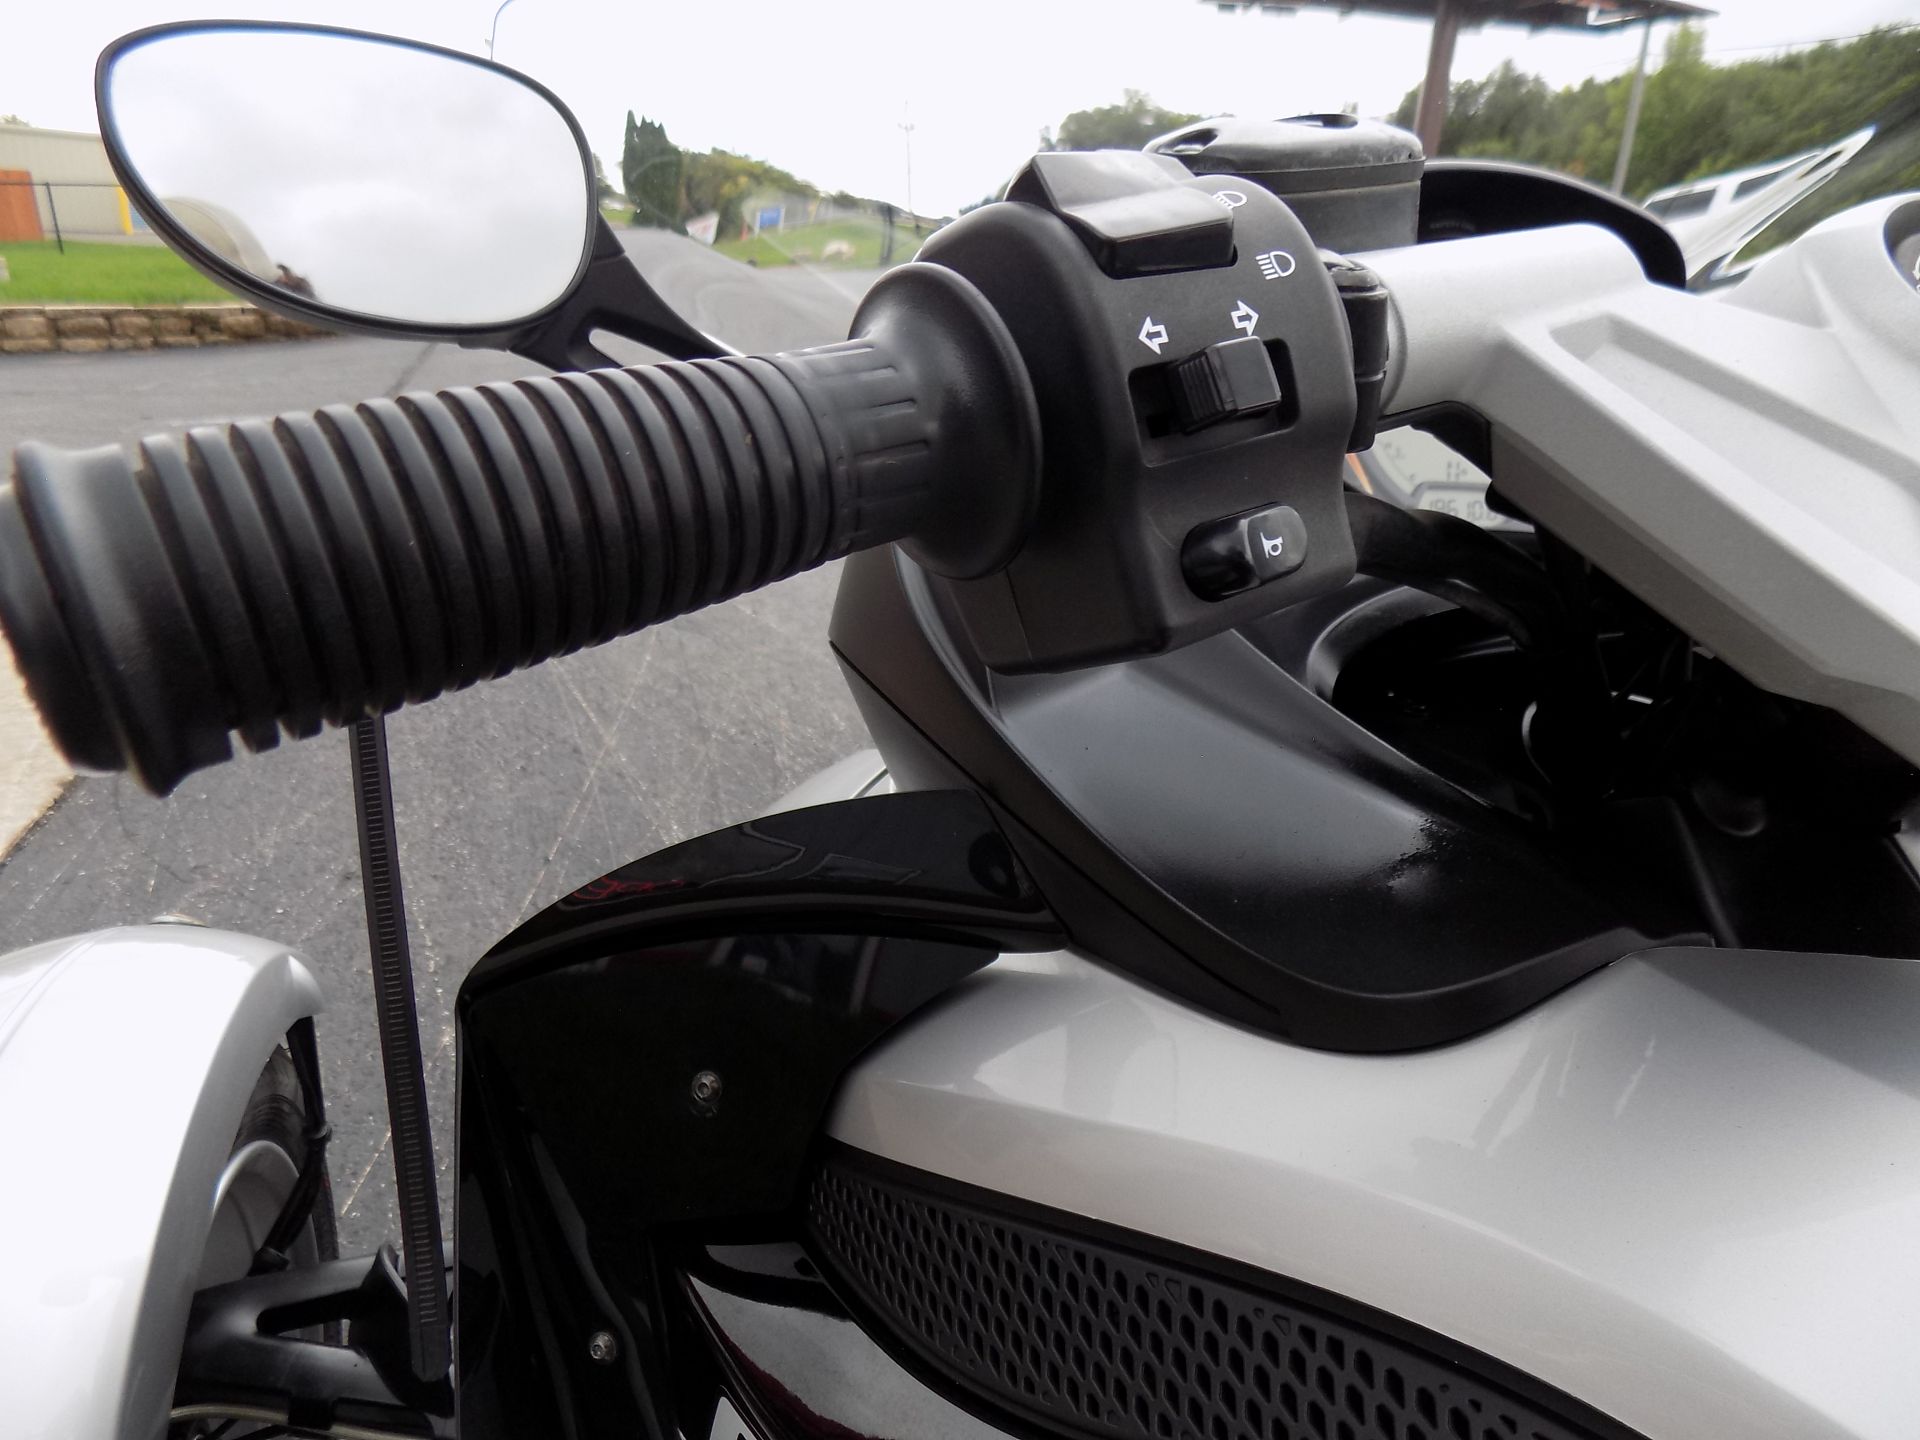 2009 Can-Am Spyder™ GS Roadster with SM5 Transmission (manual) in Janesville, Wisconsin - Photo 21